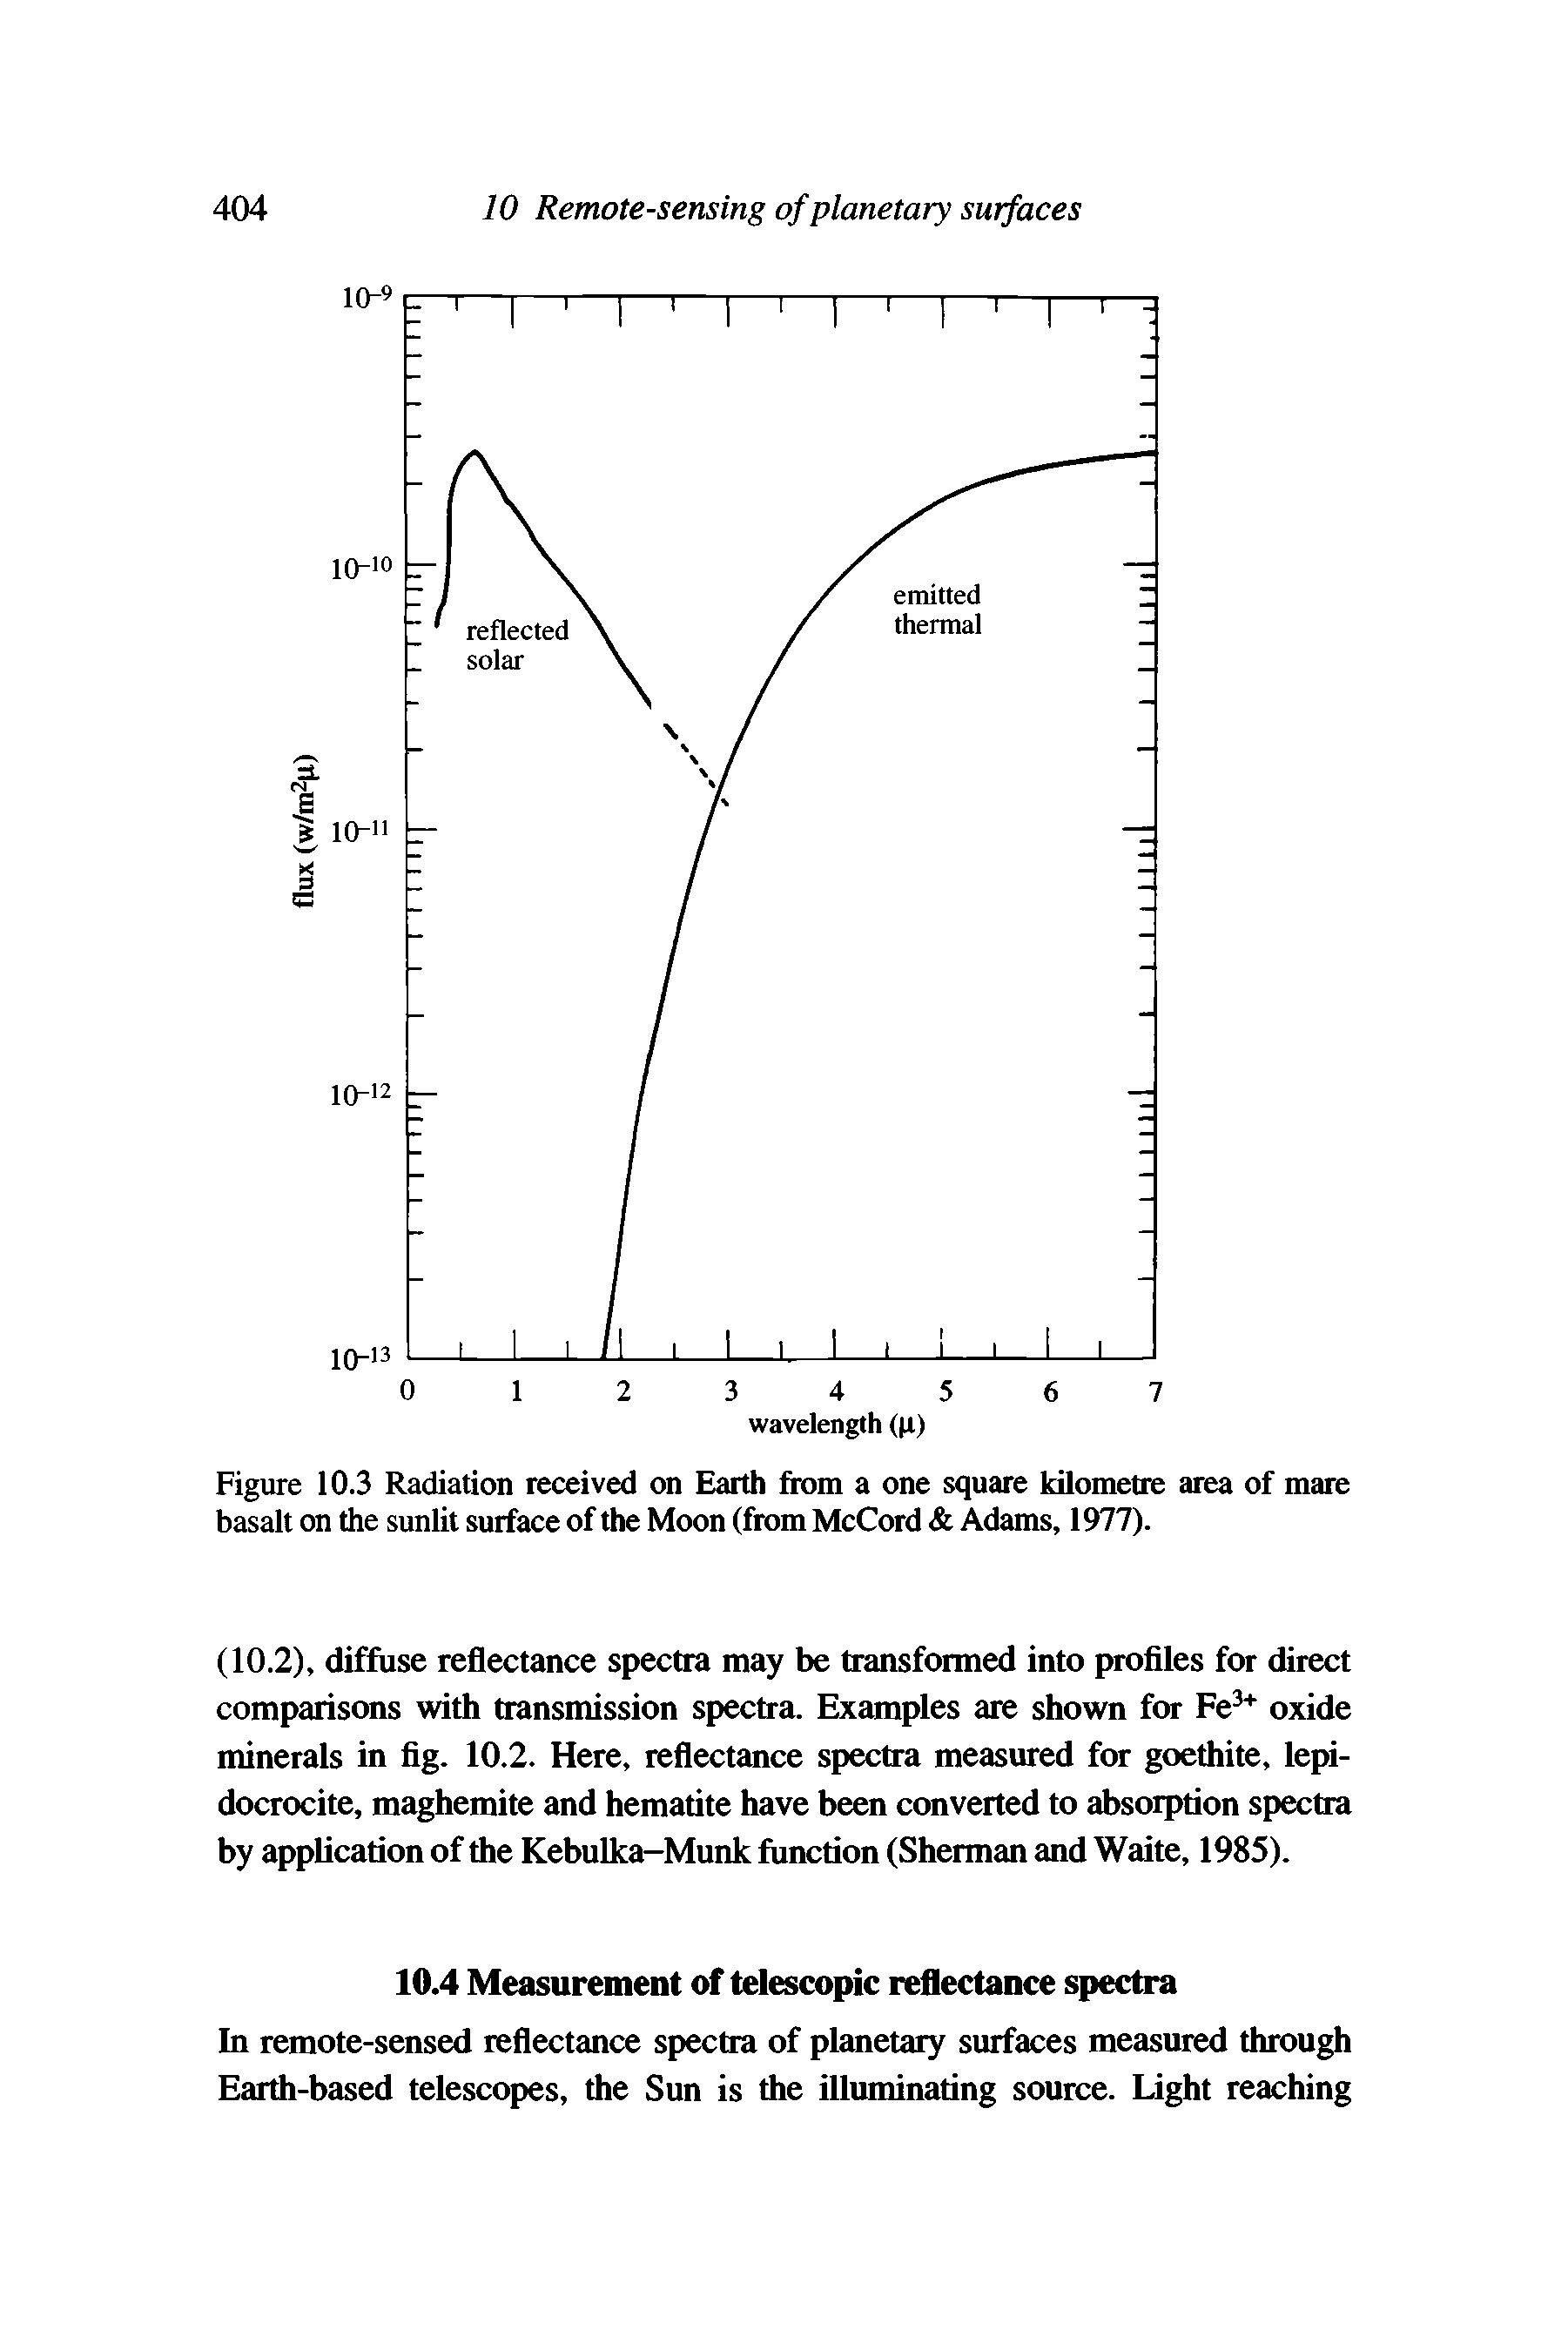 Figure 10.3 Radiation received on Earth from a one square kilometre area of mare basalt on the sunlit surface of the Moon (from McCord Adams, 1977).